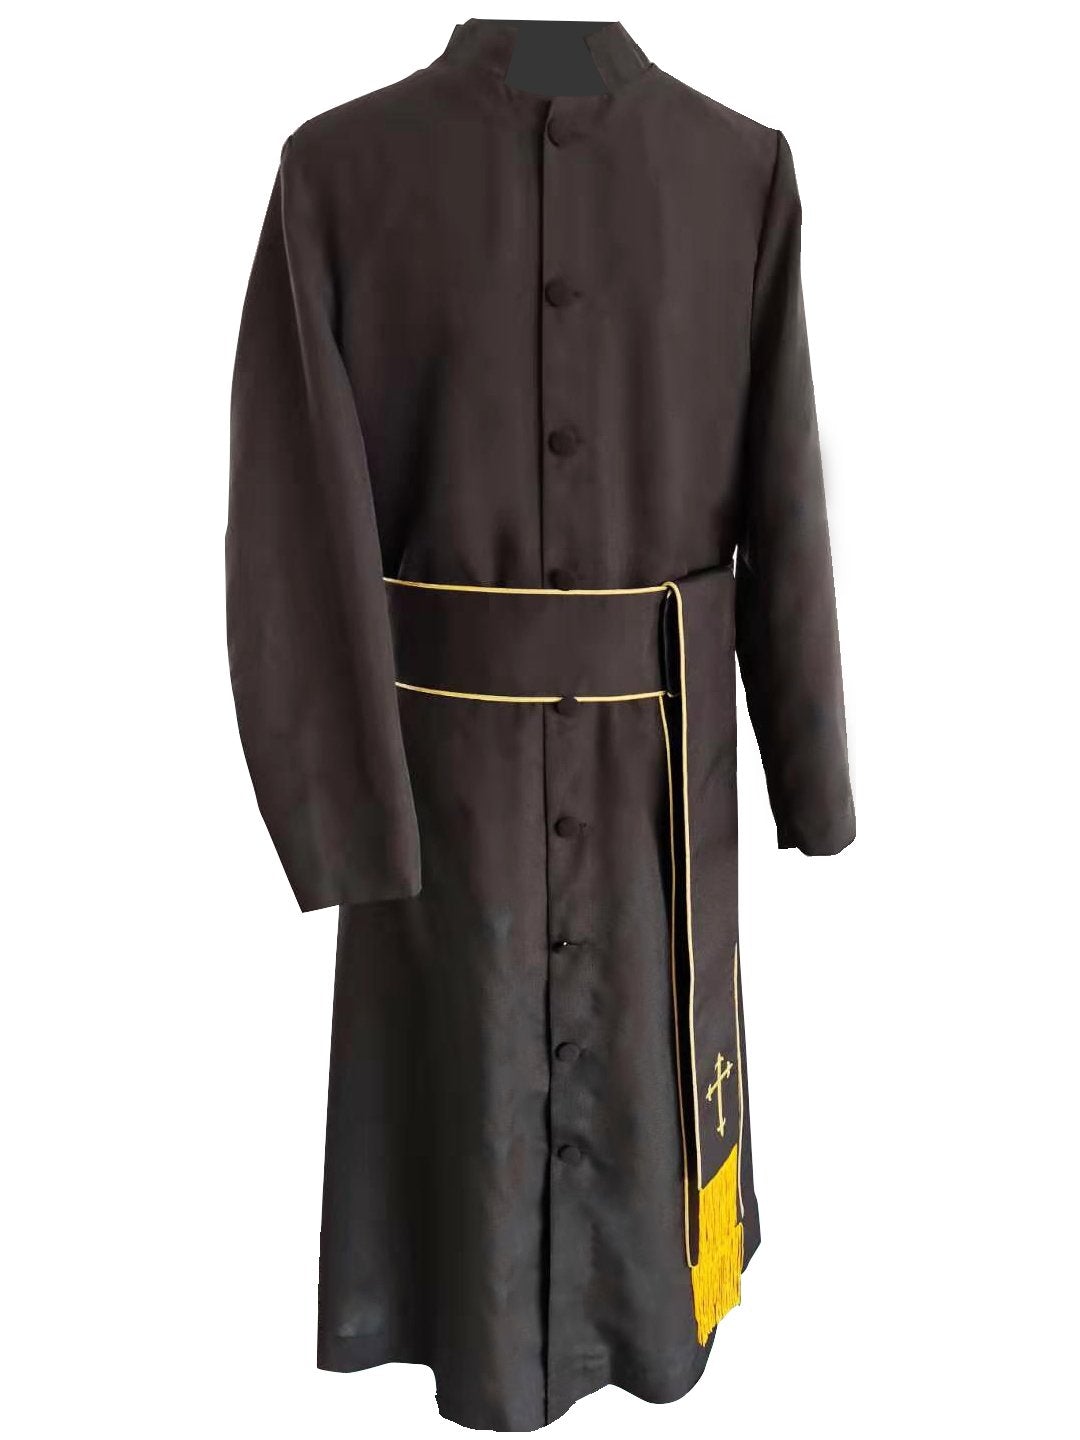 Black Clergy Band Cincture with Gold Piping - Church Choir Robes - ChoirBuy